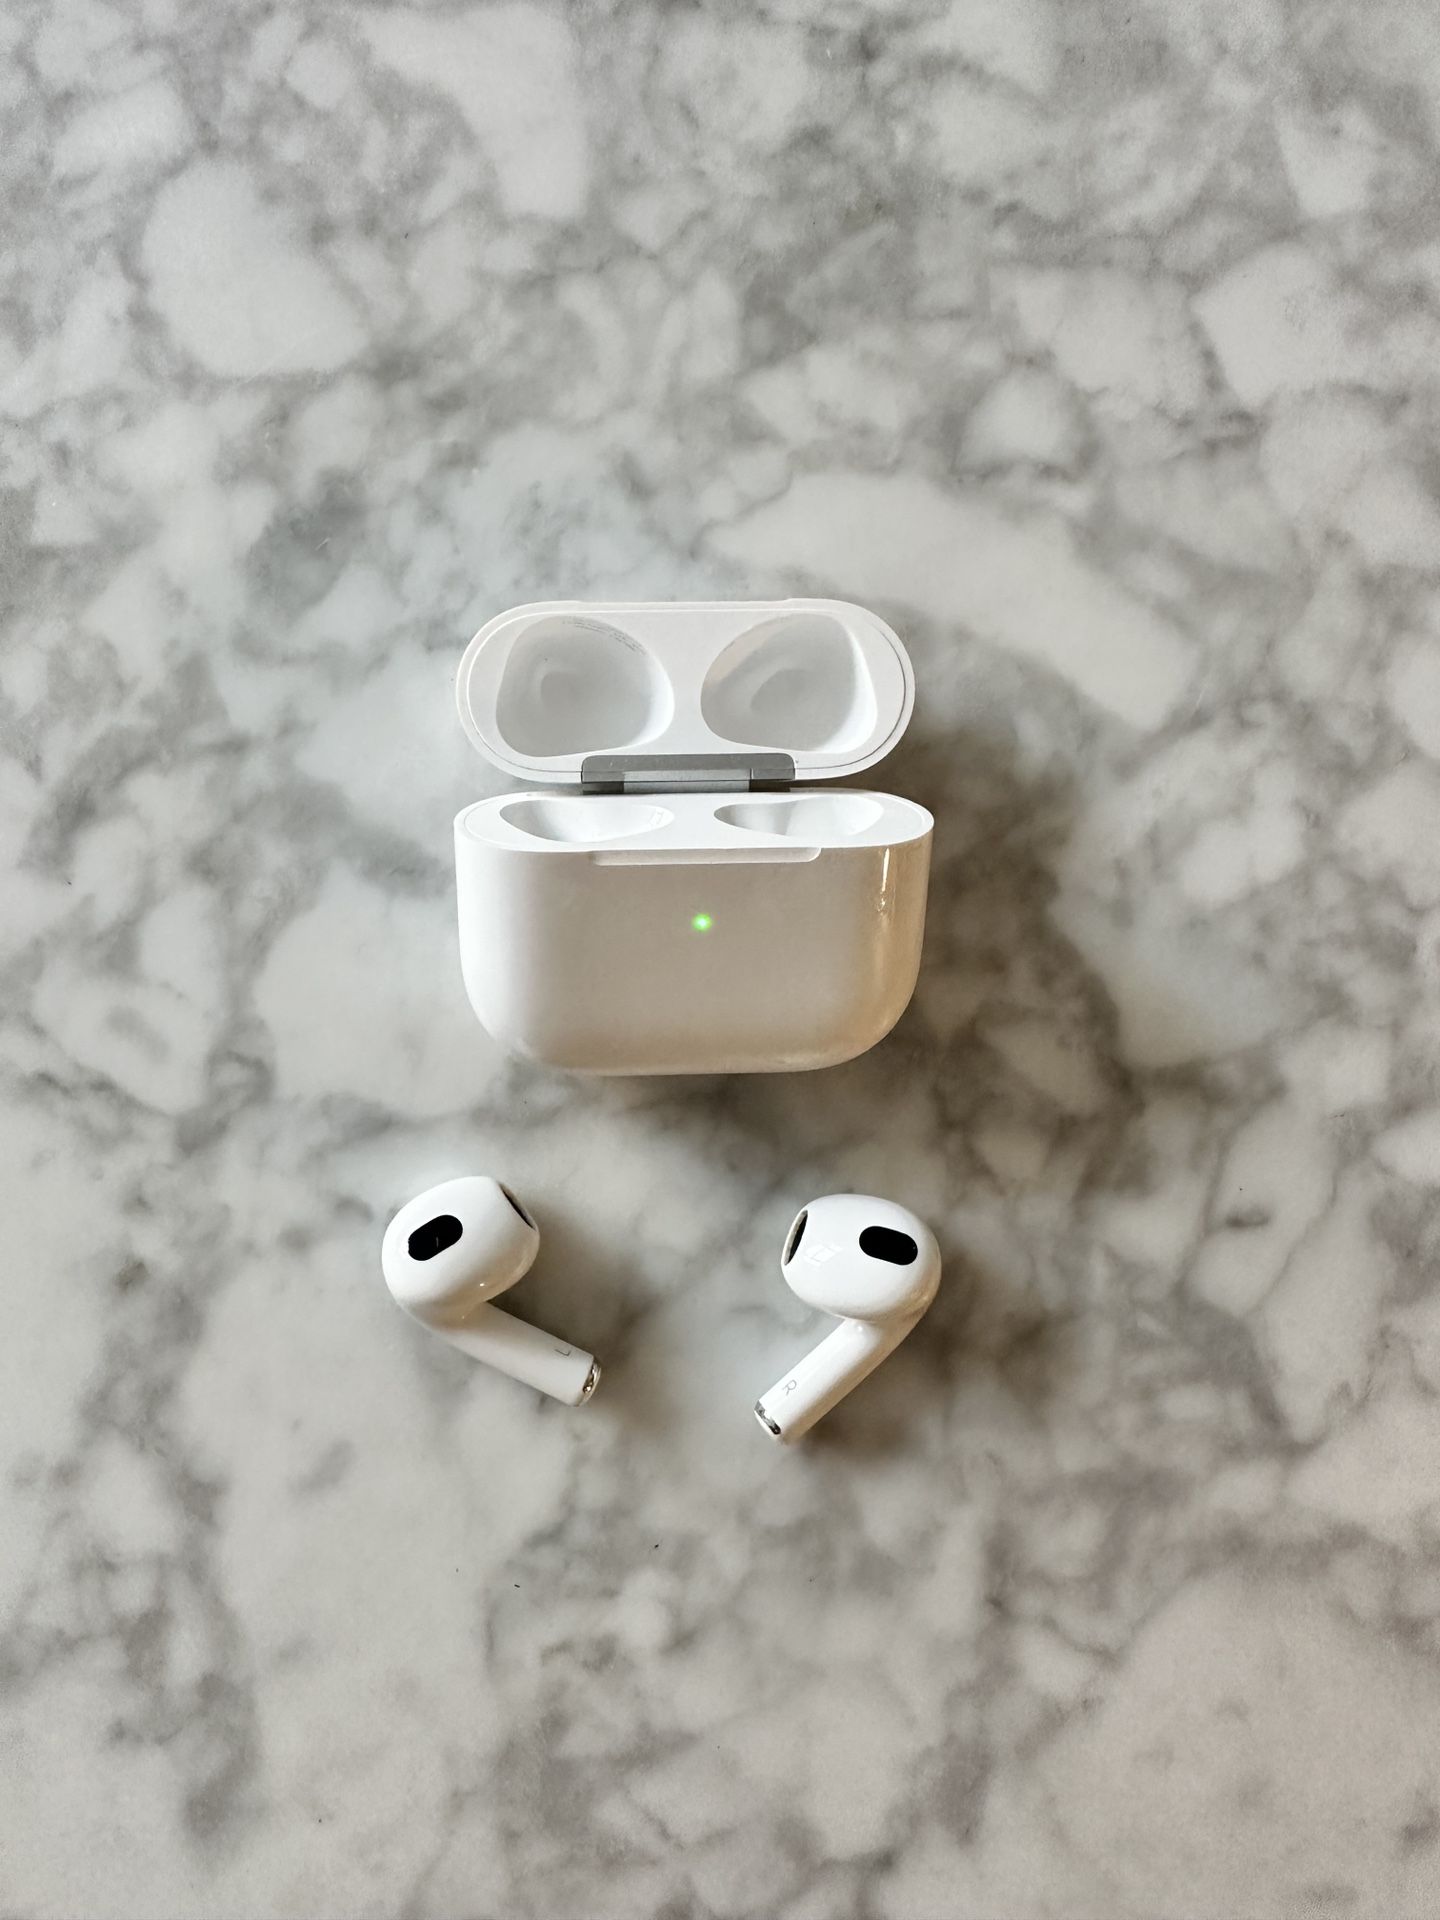 Apple AirPods (3rd Generation) Wireless Earbuds with Lightning Charging Case. Spatial Audio, Sweat and Water Resistant, Up to 30 Hours of Battery Life